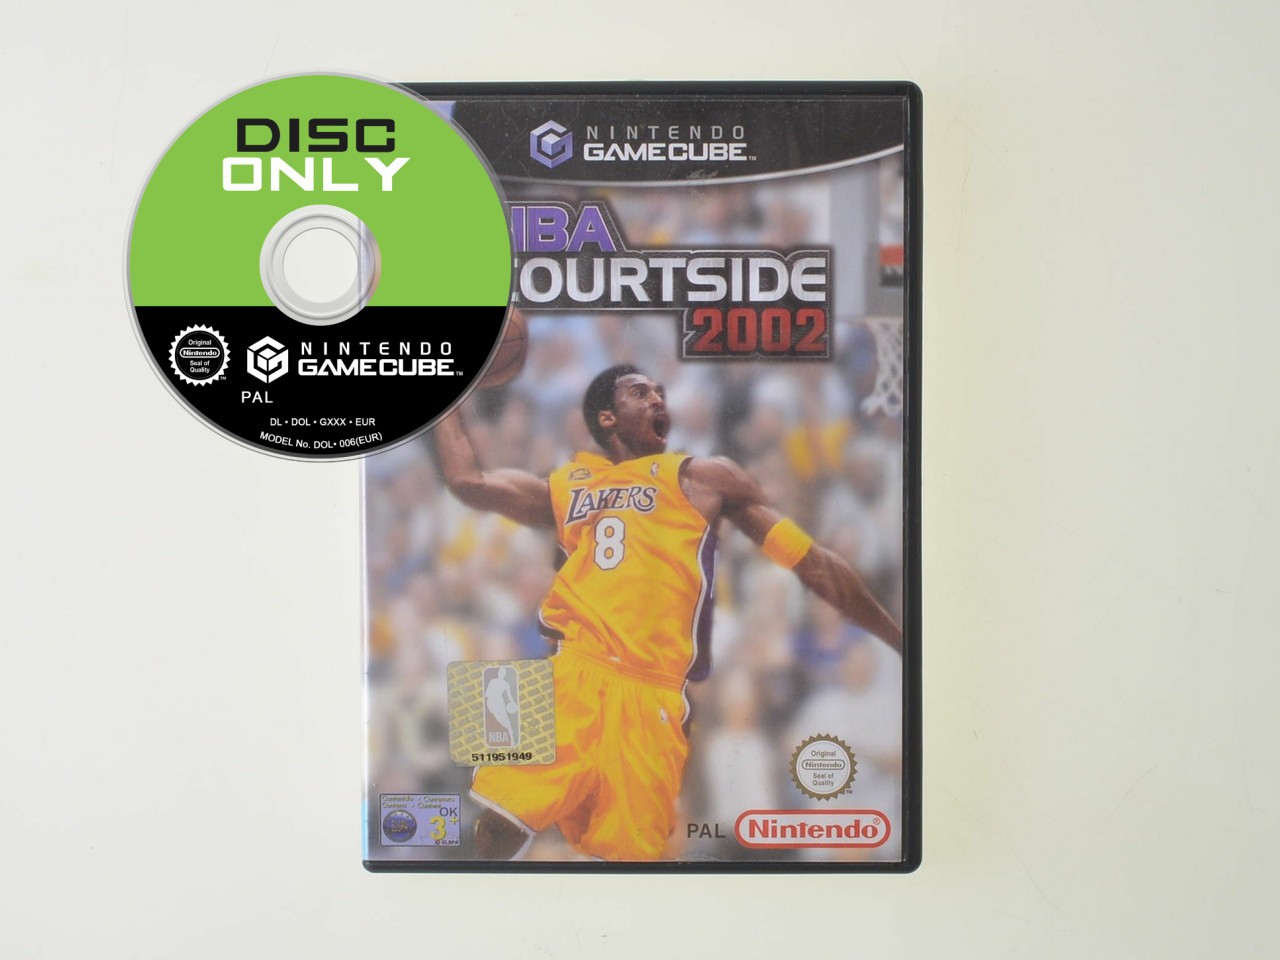 NBA Courtside 2002 - Disc Only Kopen | Gamecube Games